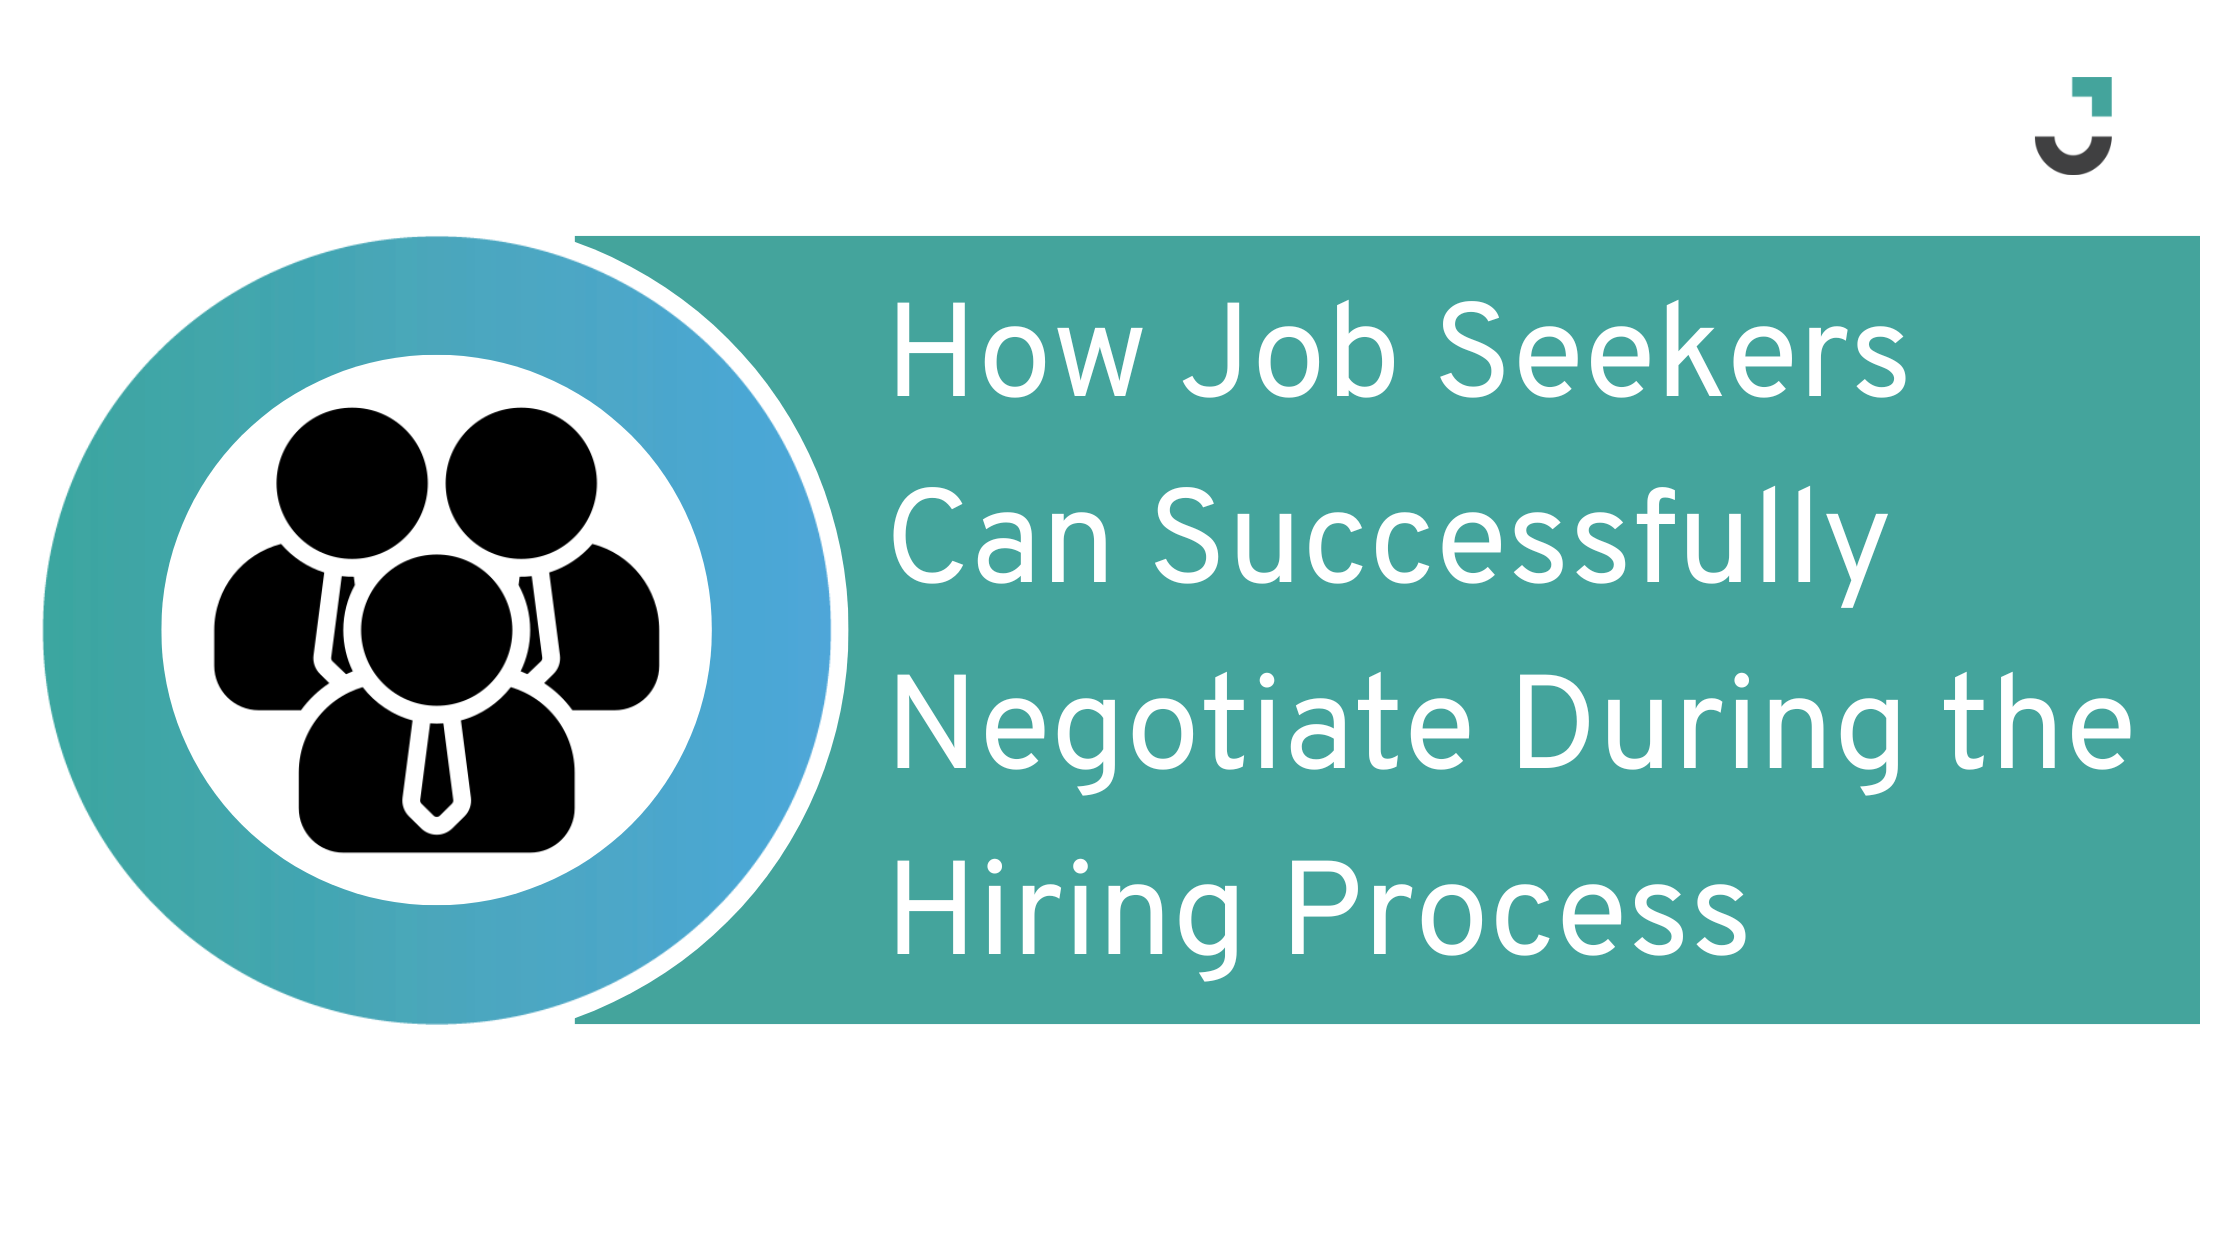 How Job Seekers Can Successfully Negotiate During the Hiring Process